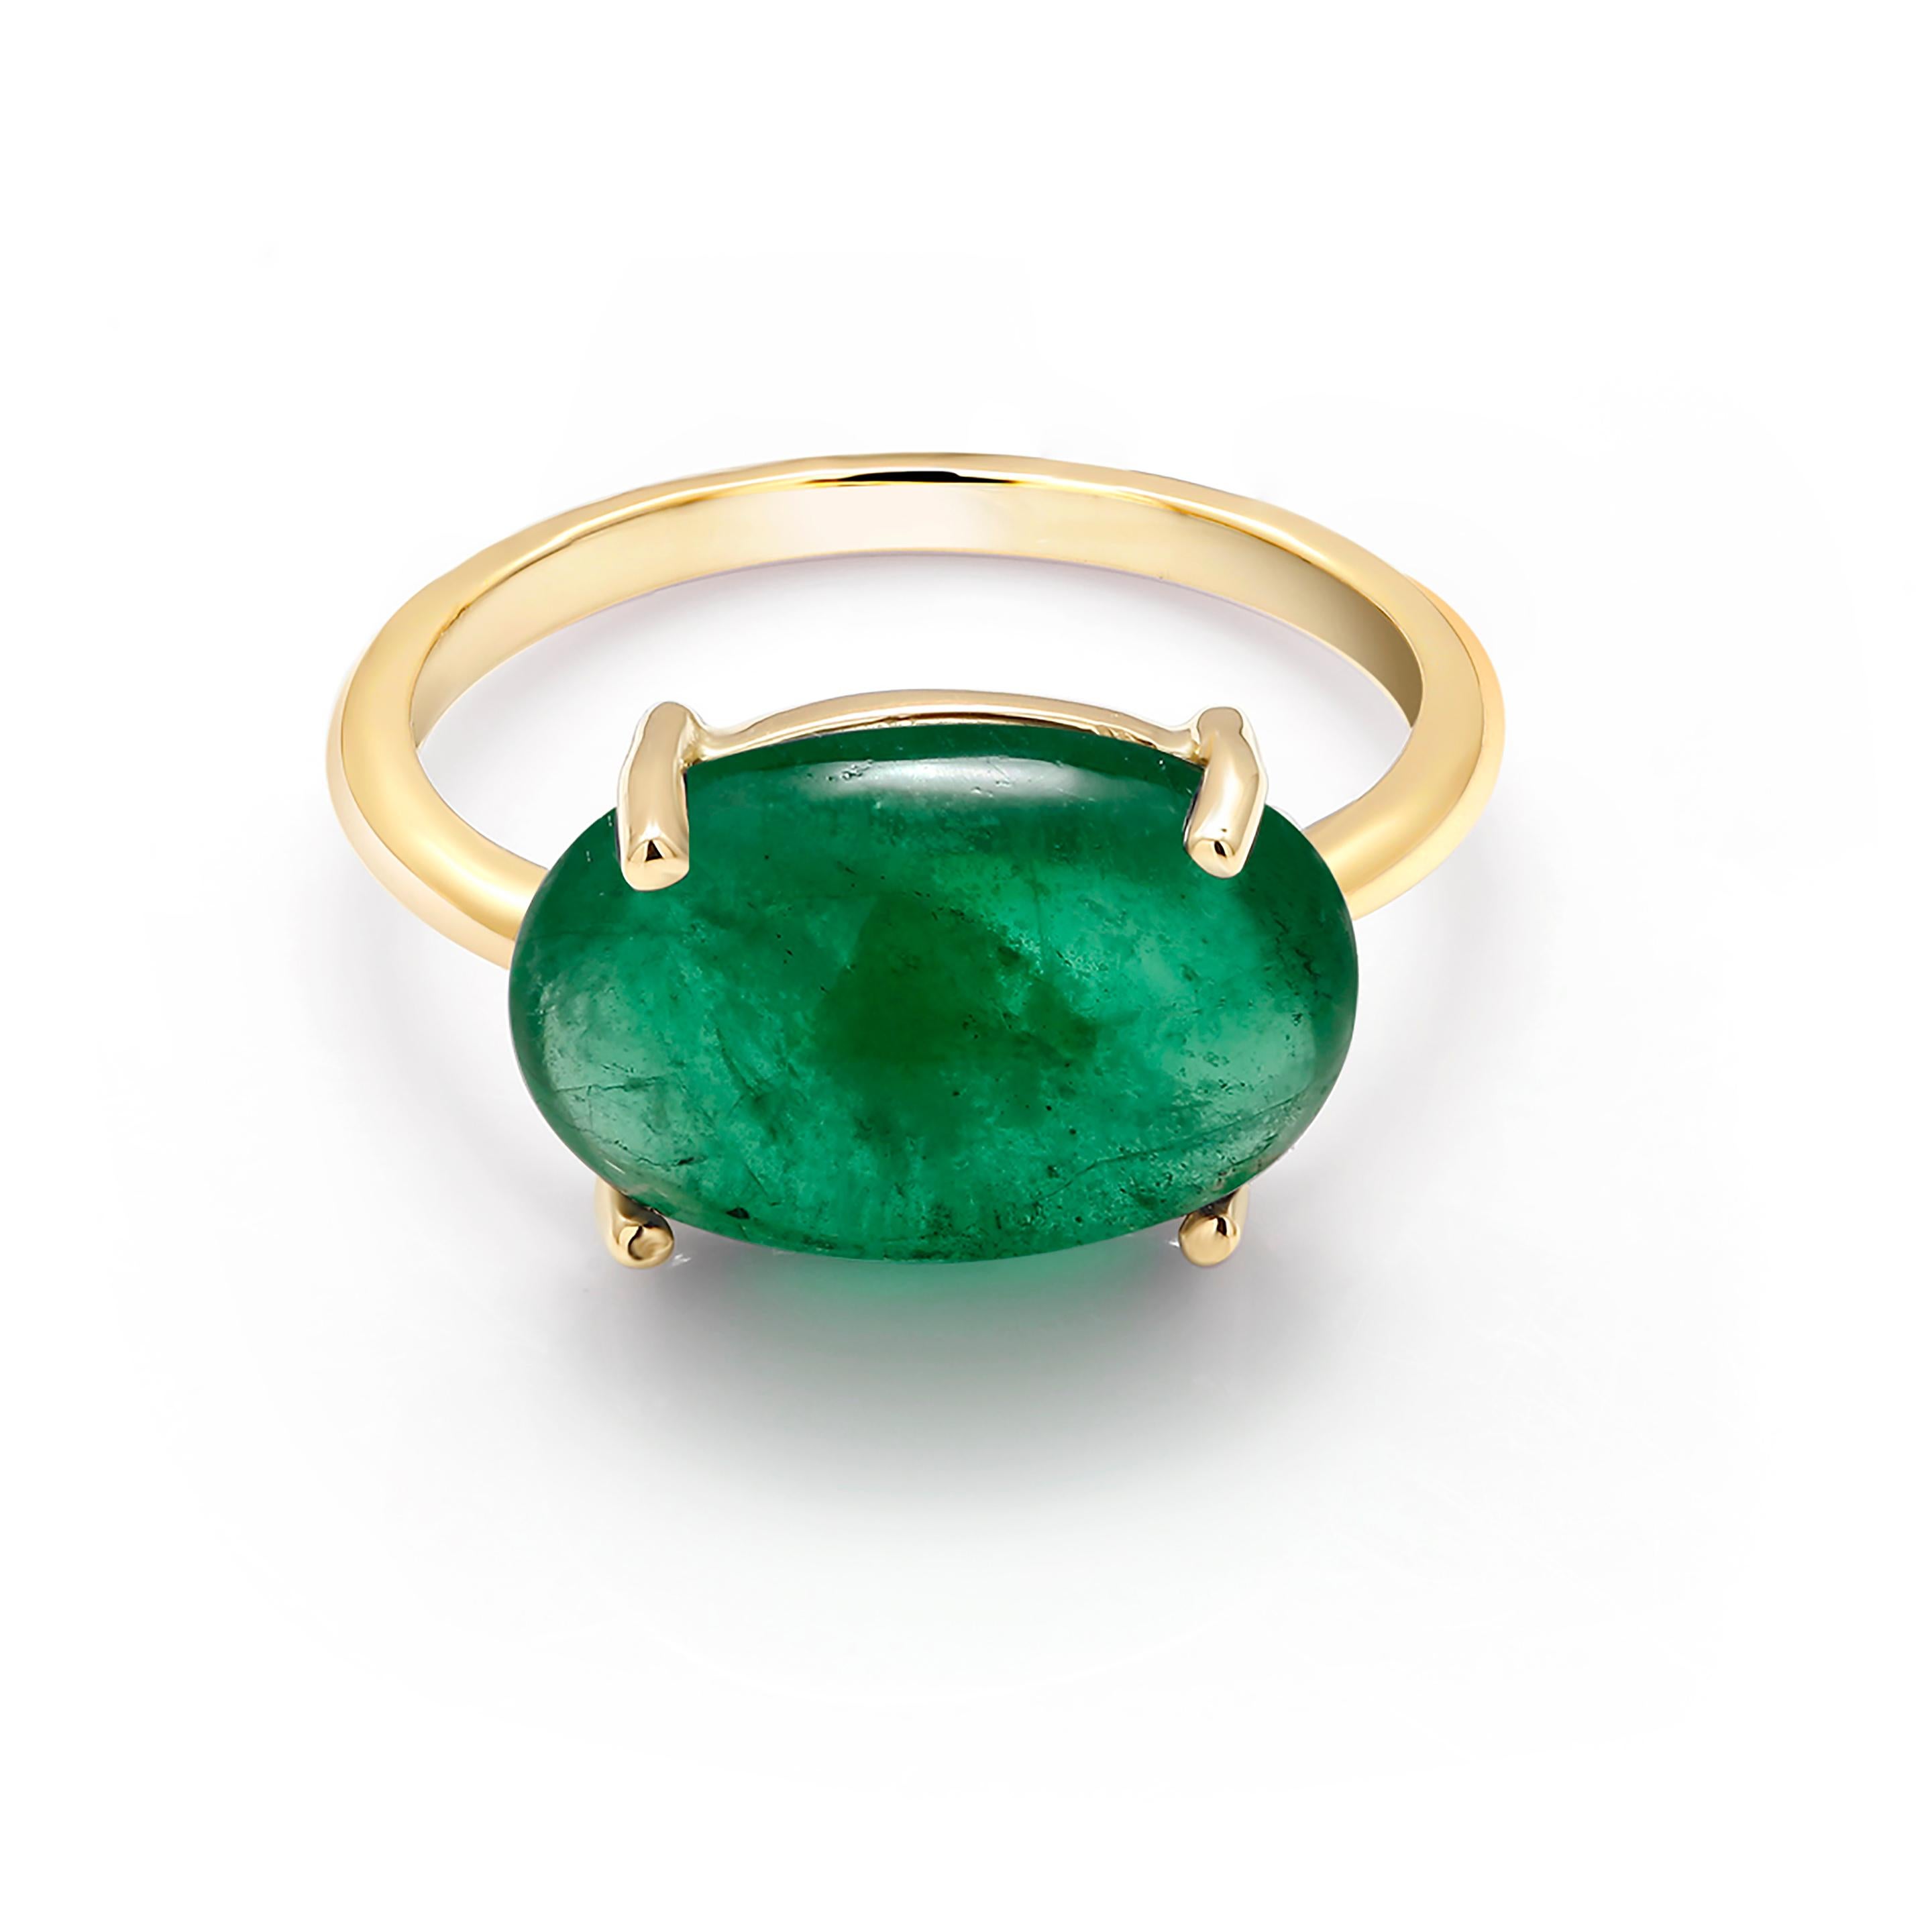 Cabochon Emerald Solitaire Yellow Gold Cocktail Ring Weighing 6.70 Carats 1